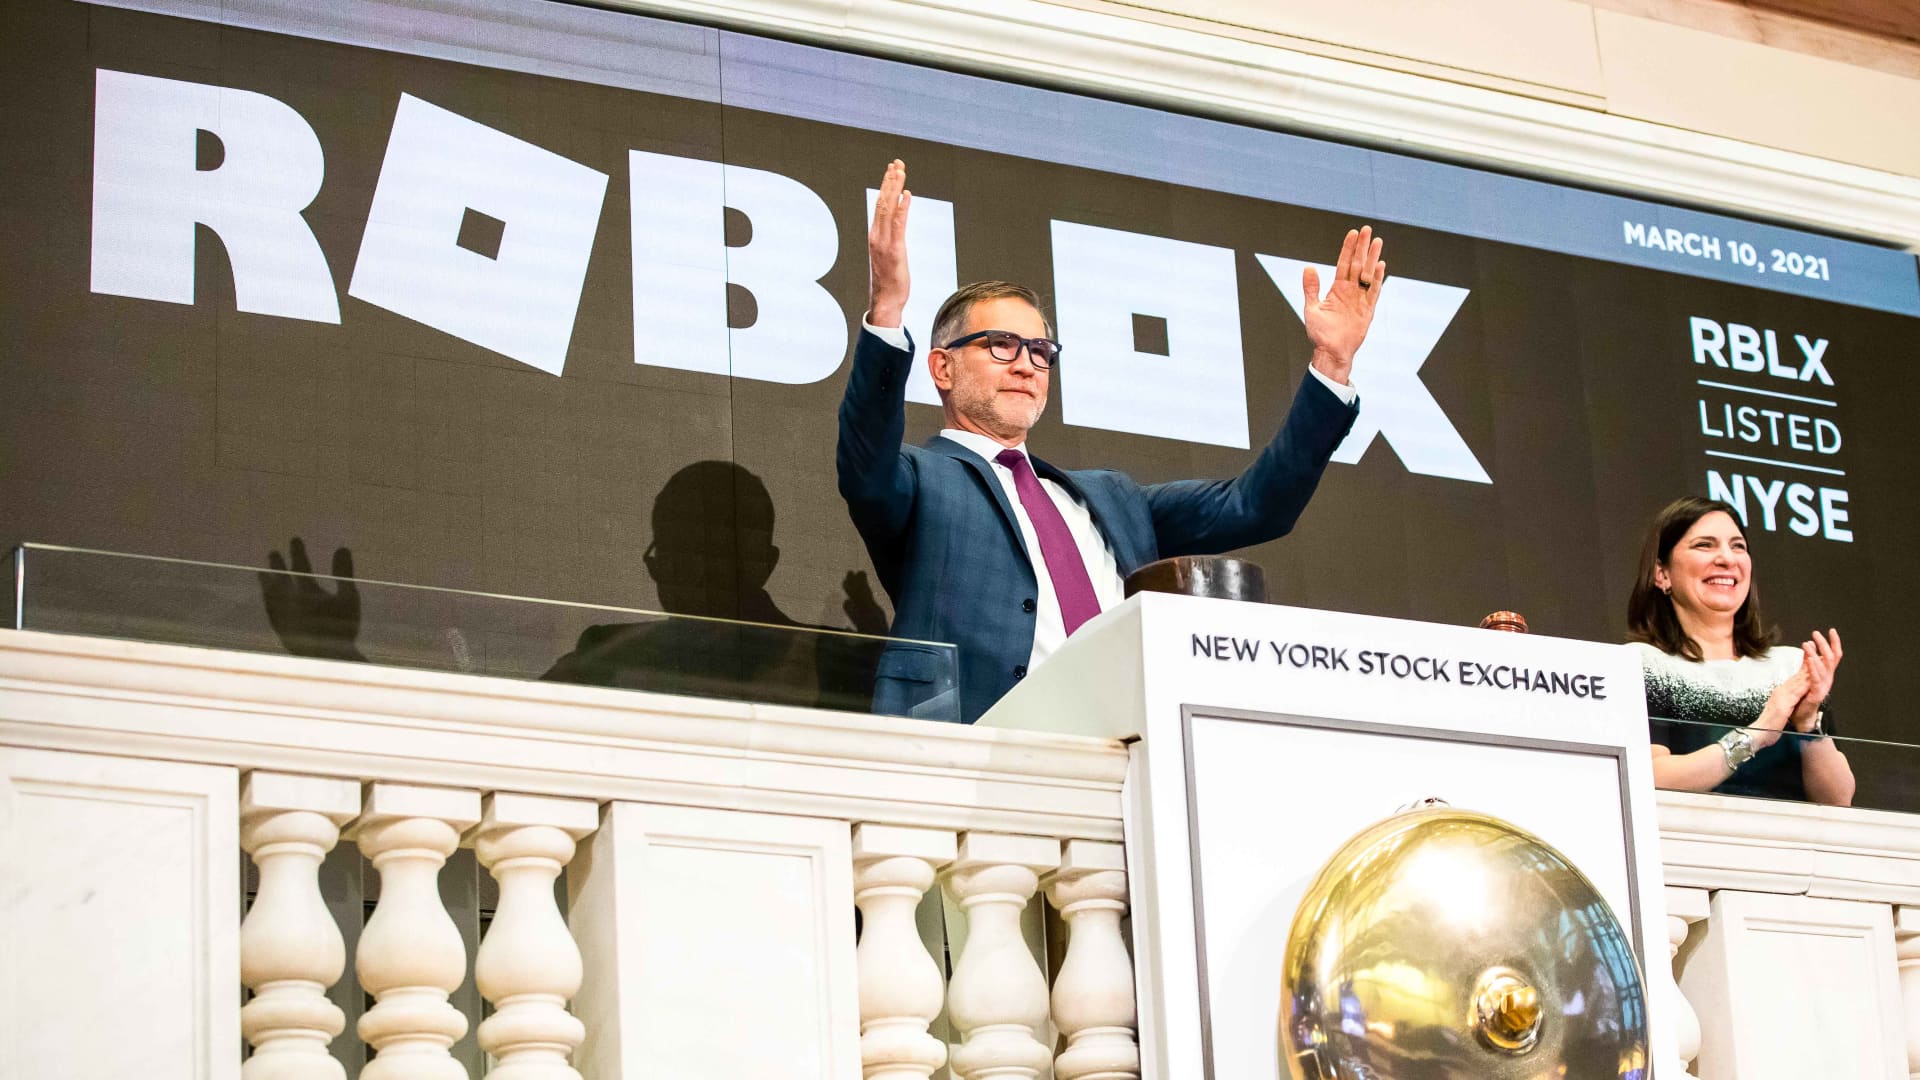 The New York Stock Exchange welcomes executives and guests of Roblox (NYSE: RBLX), today, Wednesday, March 10, 2021, in celebration of its Direct Listing.